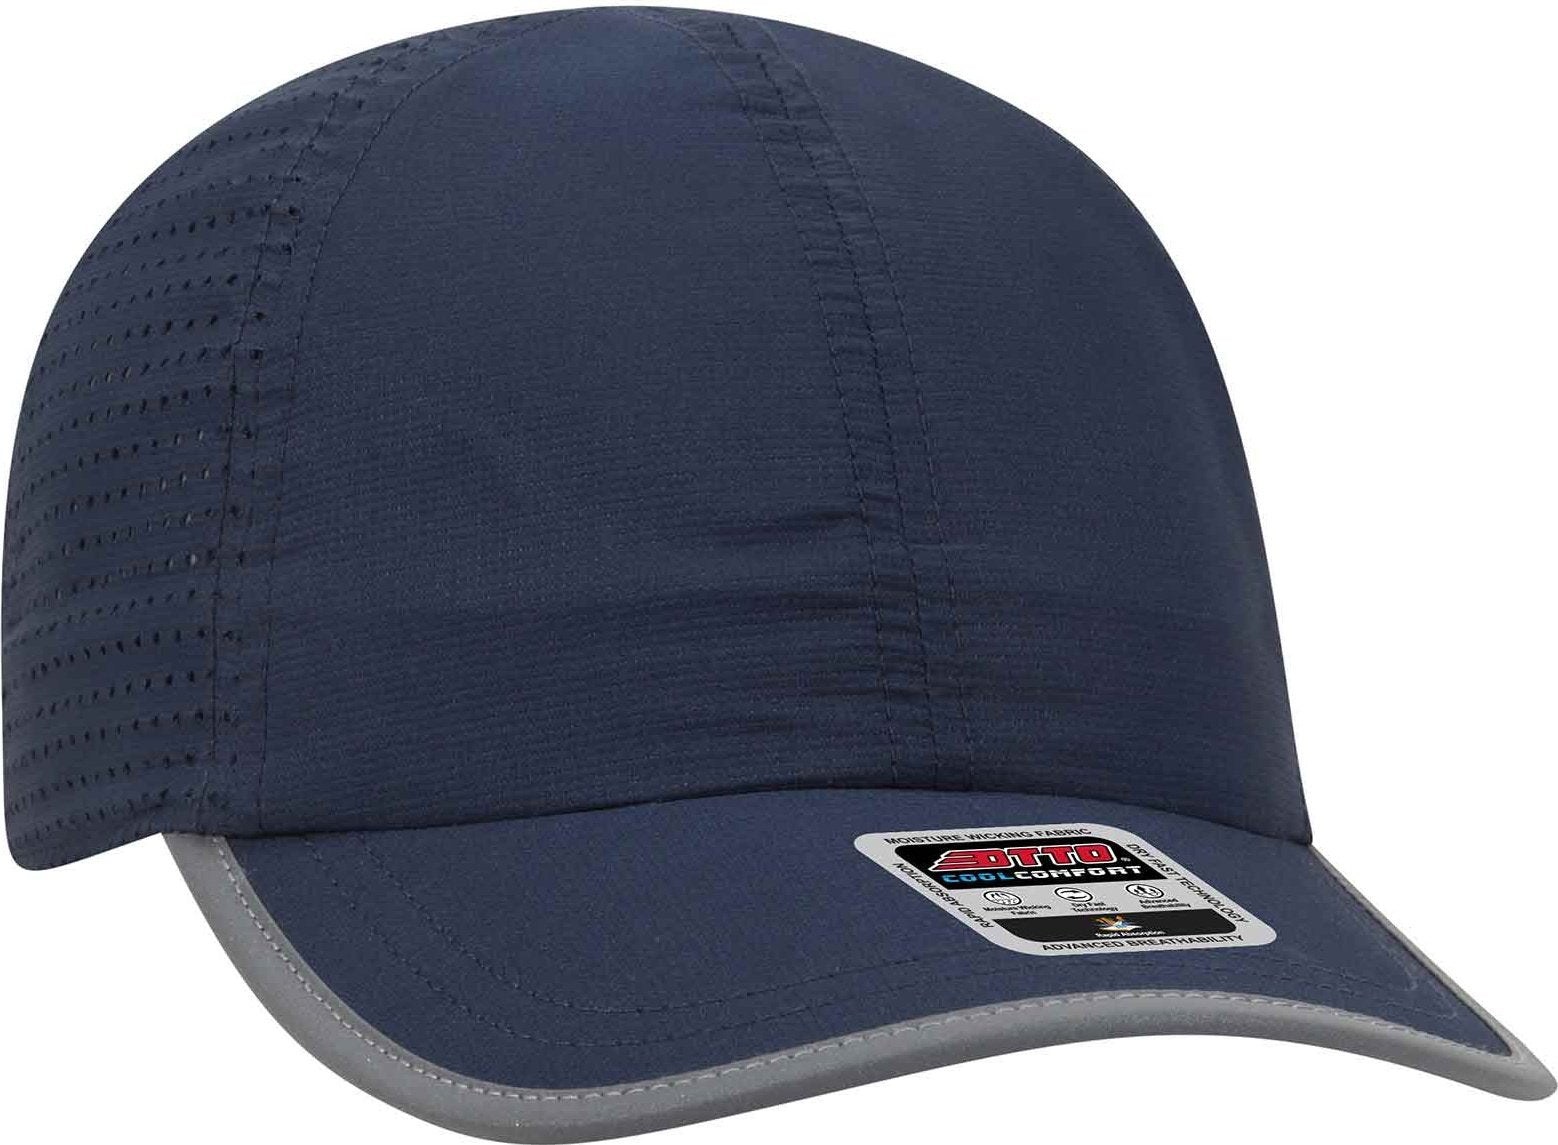 OTTO 133-1258 6 Panel Textured Polyester Pongee with Mesh Inserts Reflective Sandwich Visor Running Cap - Navy - HIT a Double - 1